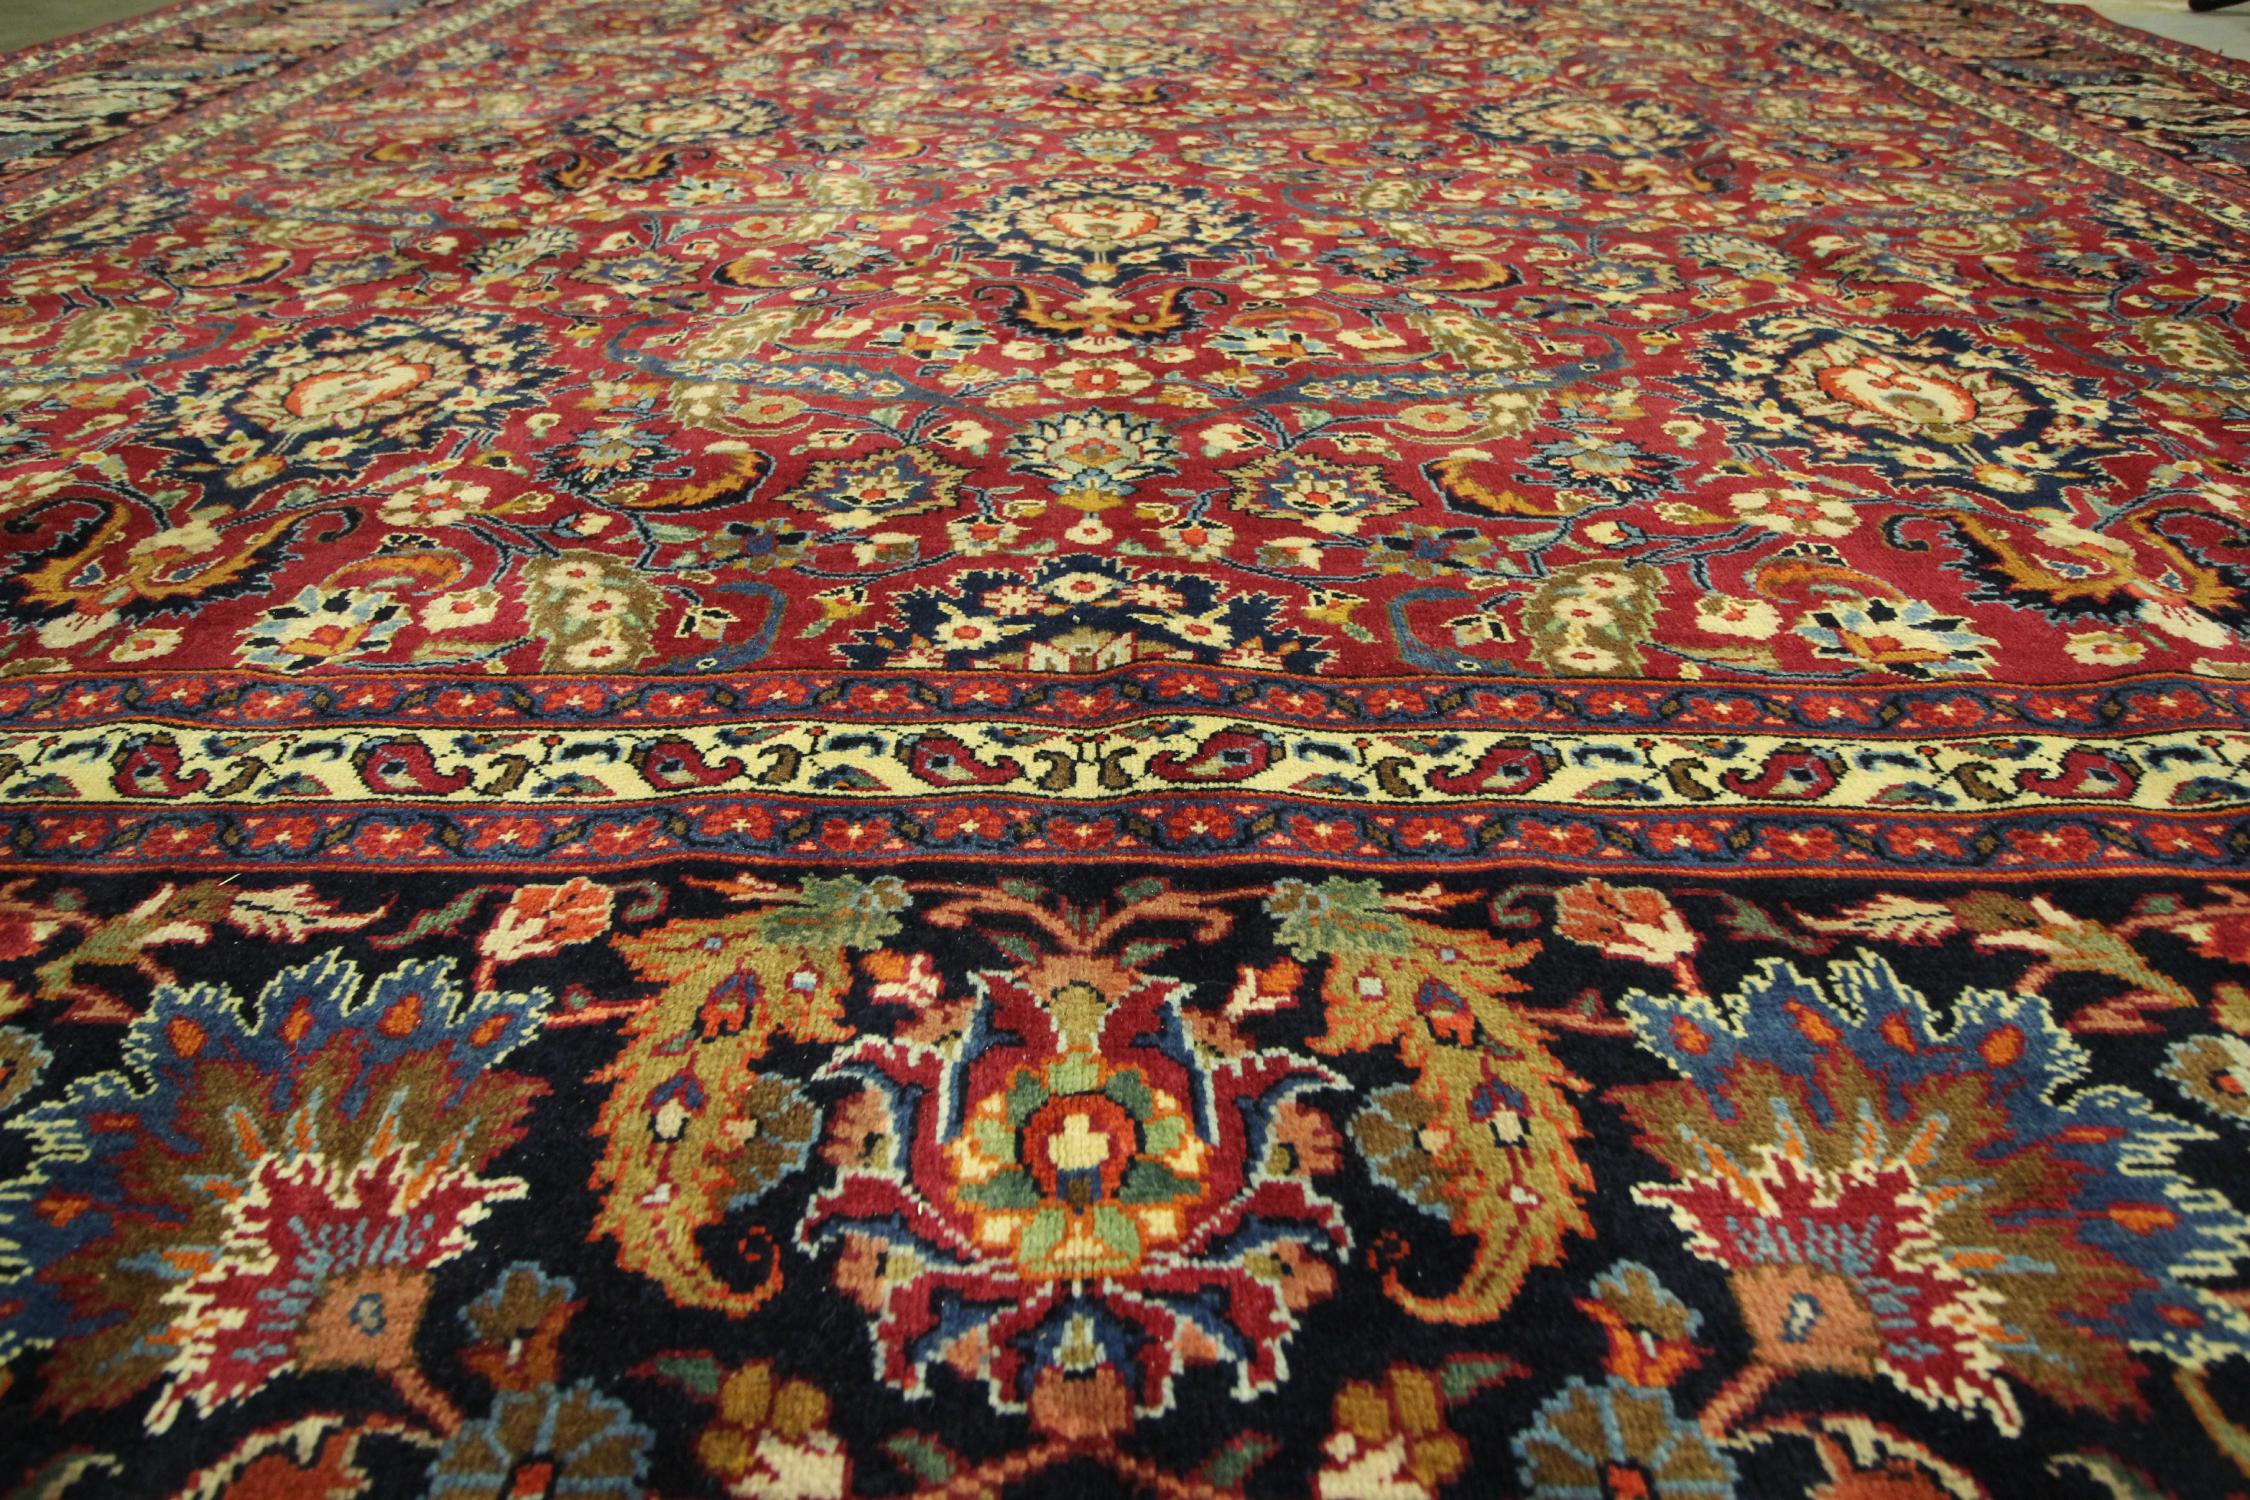 Early 20th Century Antique Rugs Crimson Red Handmade Carpet, All over Turkish Rugs for Sale For Sale